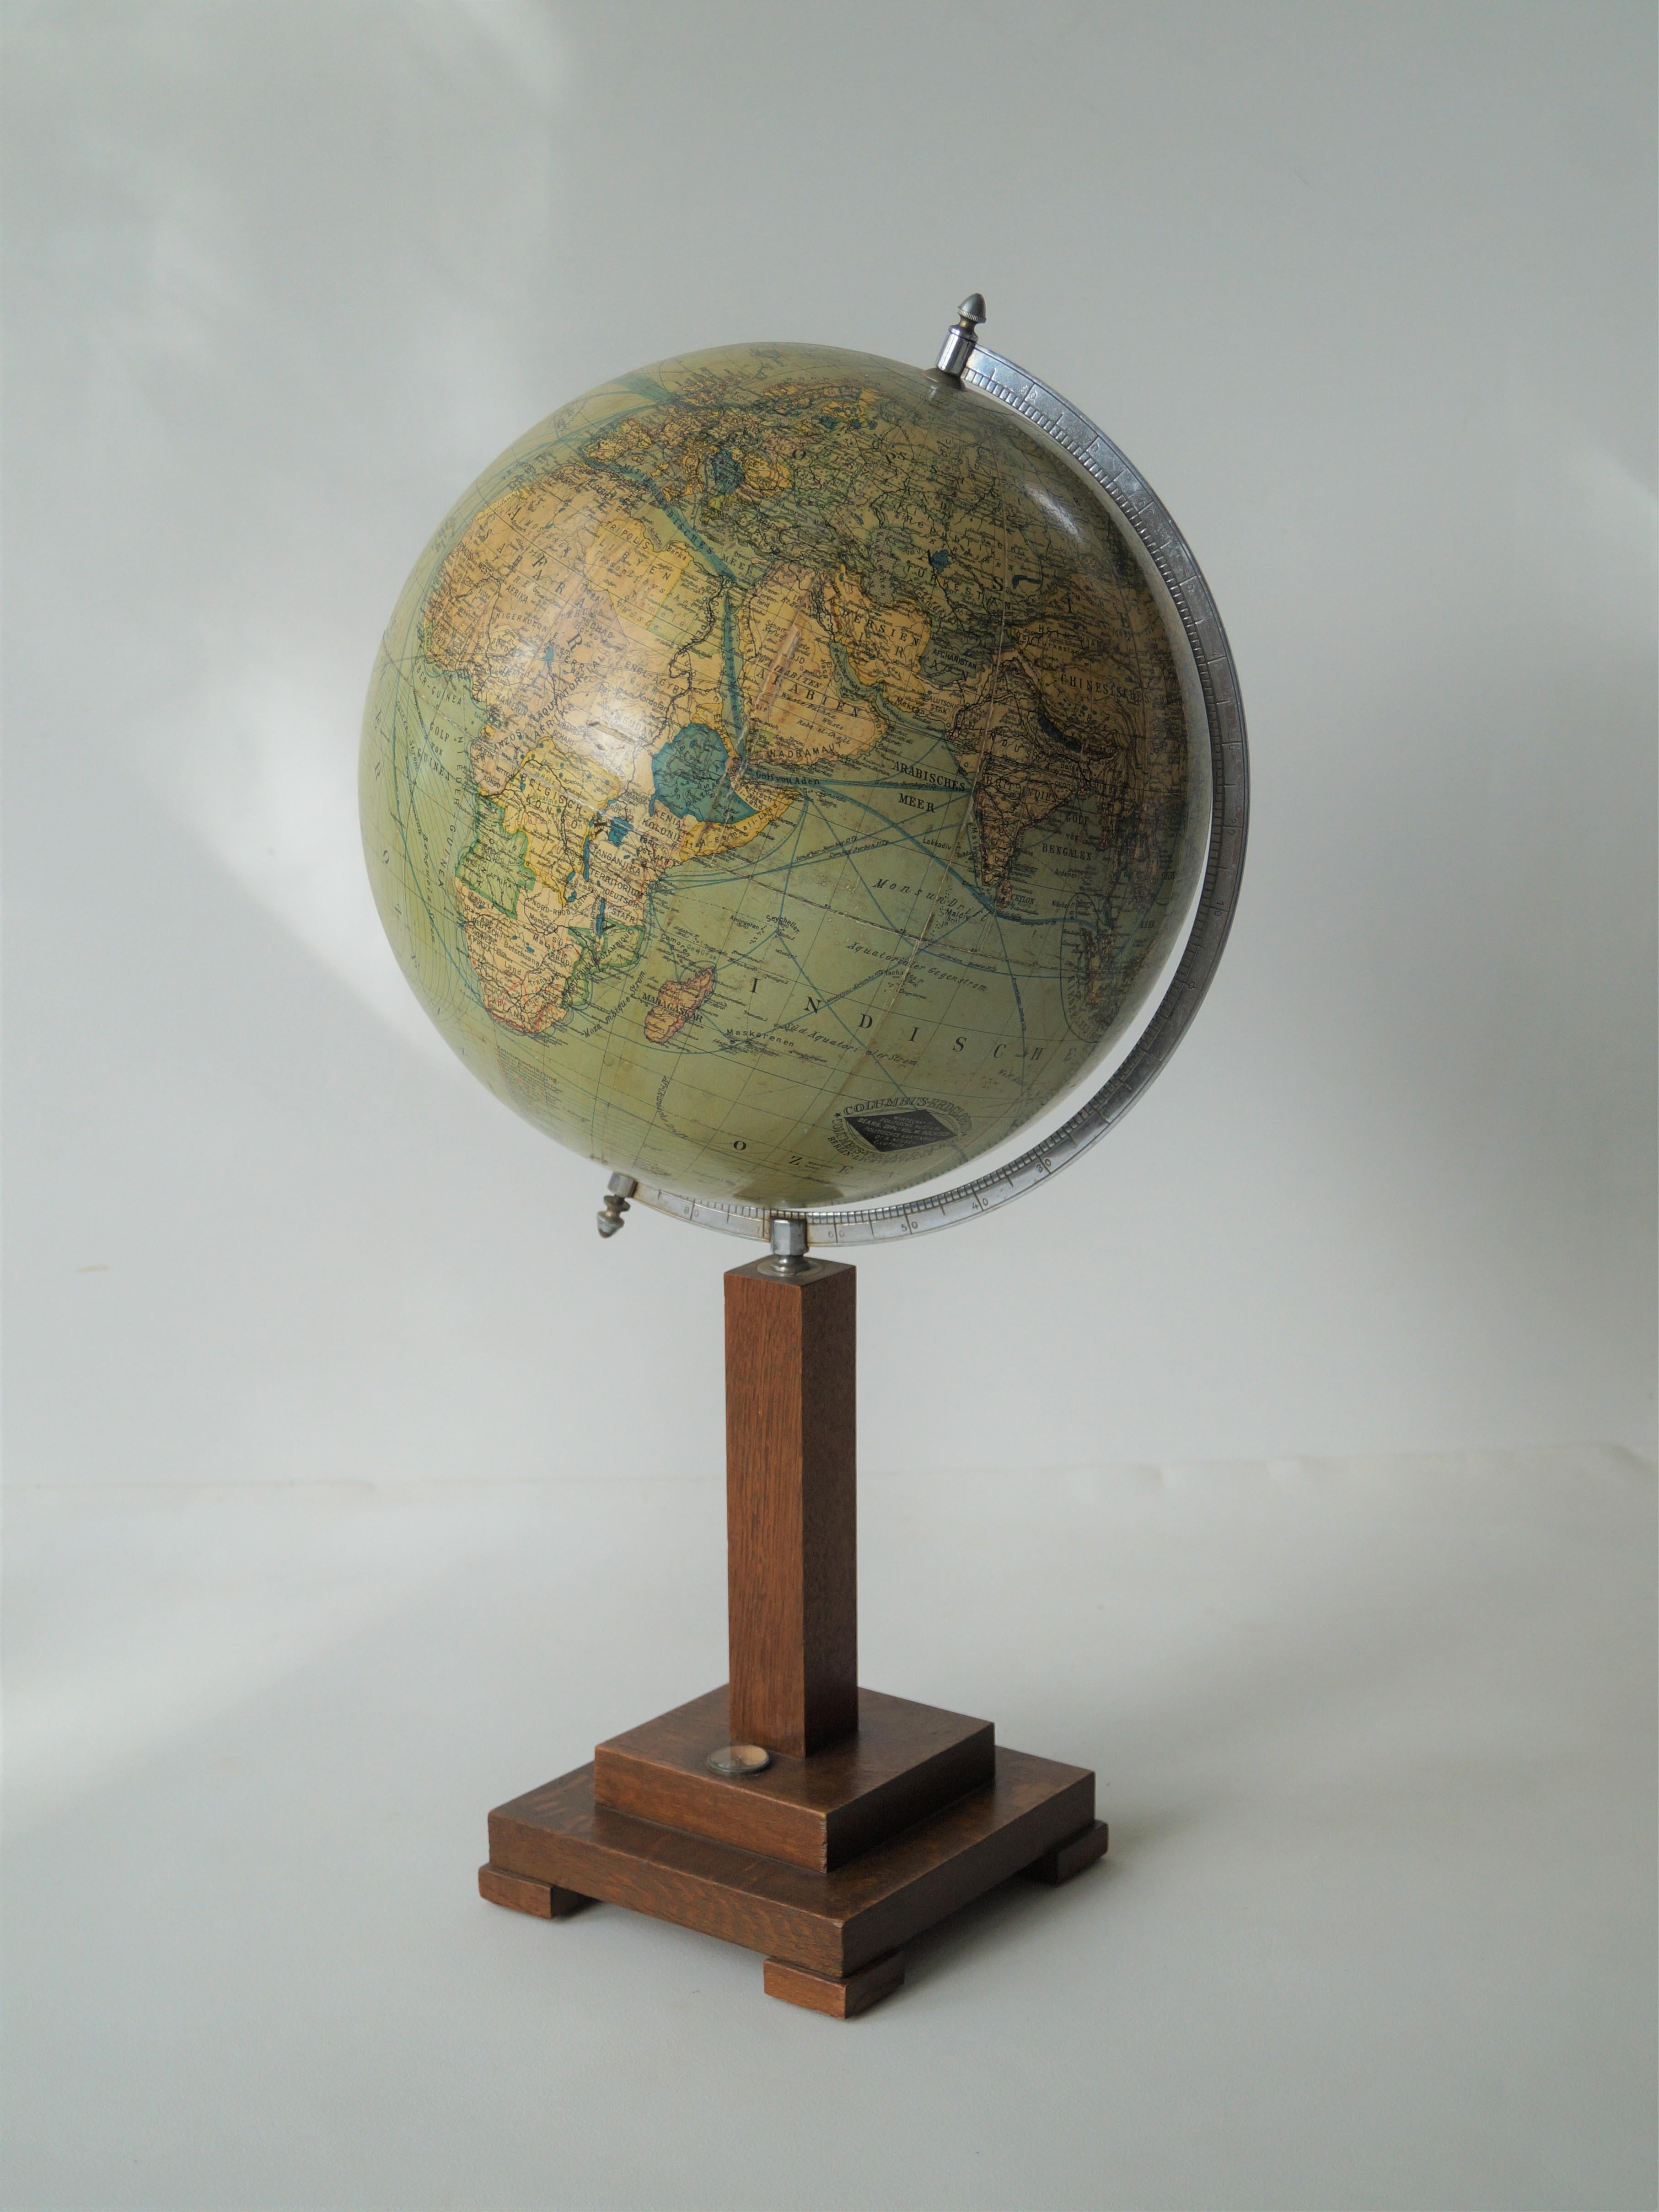 A large antique globe from the 1930s by Columbus Erdglobus (Germany, Berlin since early 1900s), and cartographers Dr. R Neuse and C. Luther.

I have verified with the manufacturer (who is still making globes) that this globe can't be later than